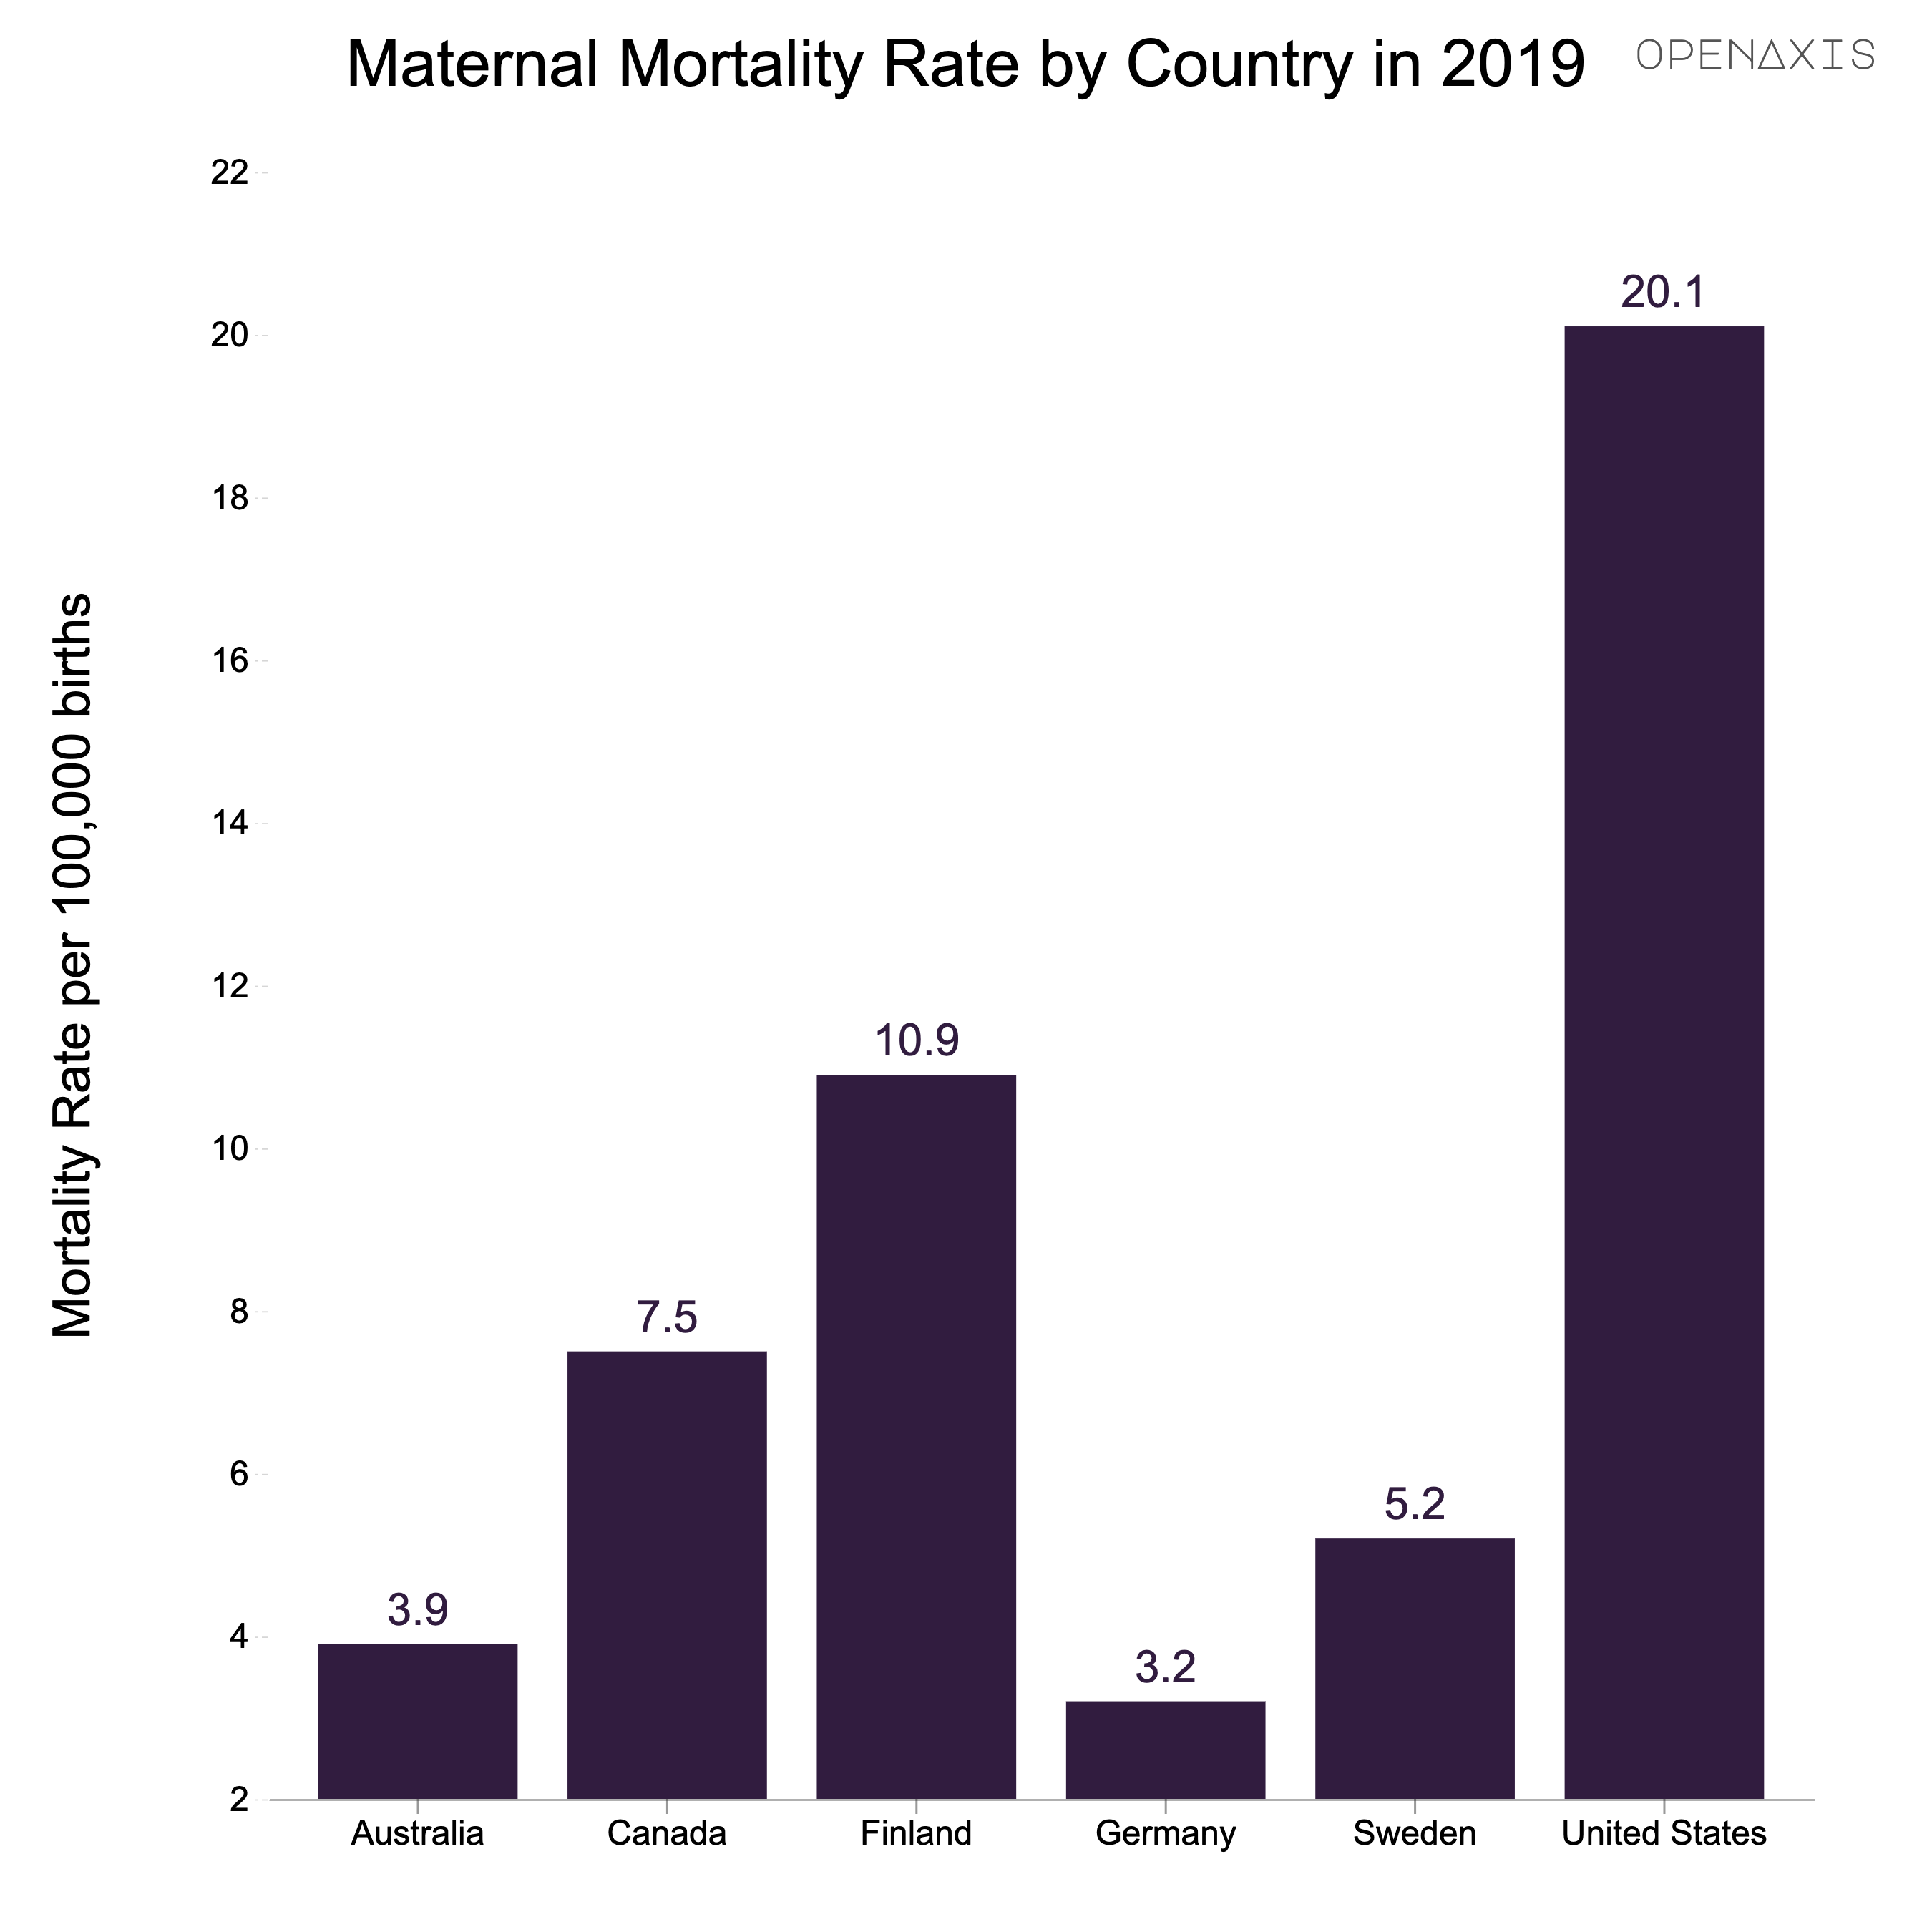 "Maternal Mortality Rate by Country in 2019"